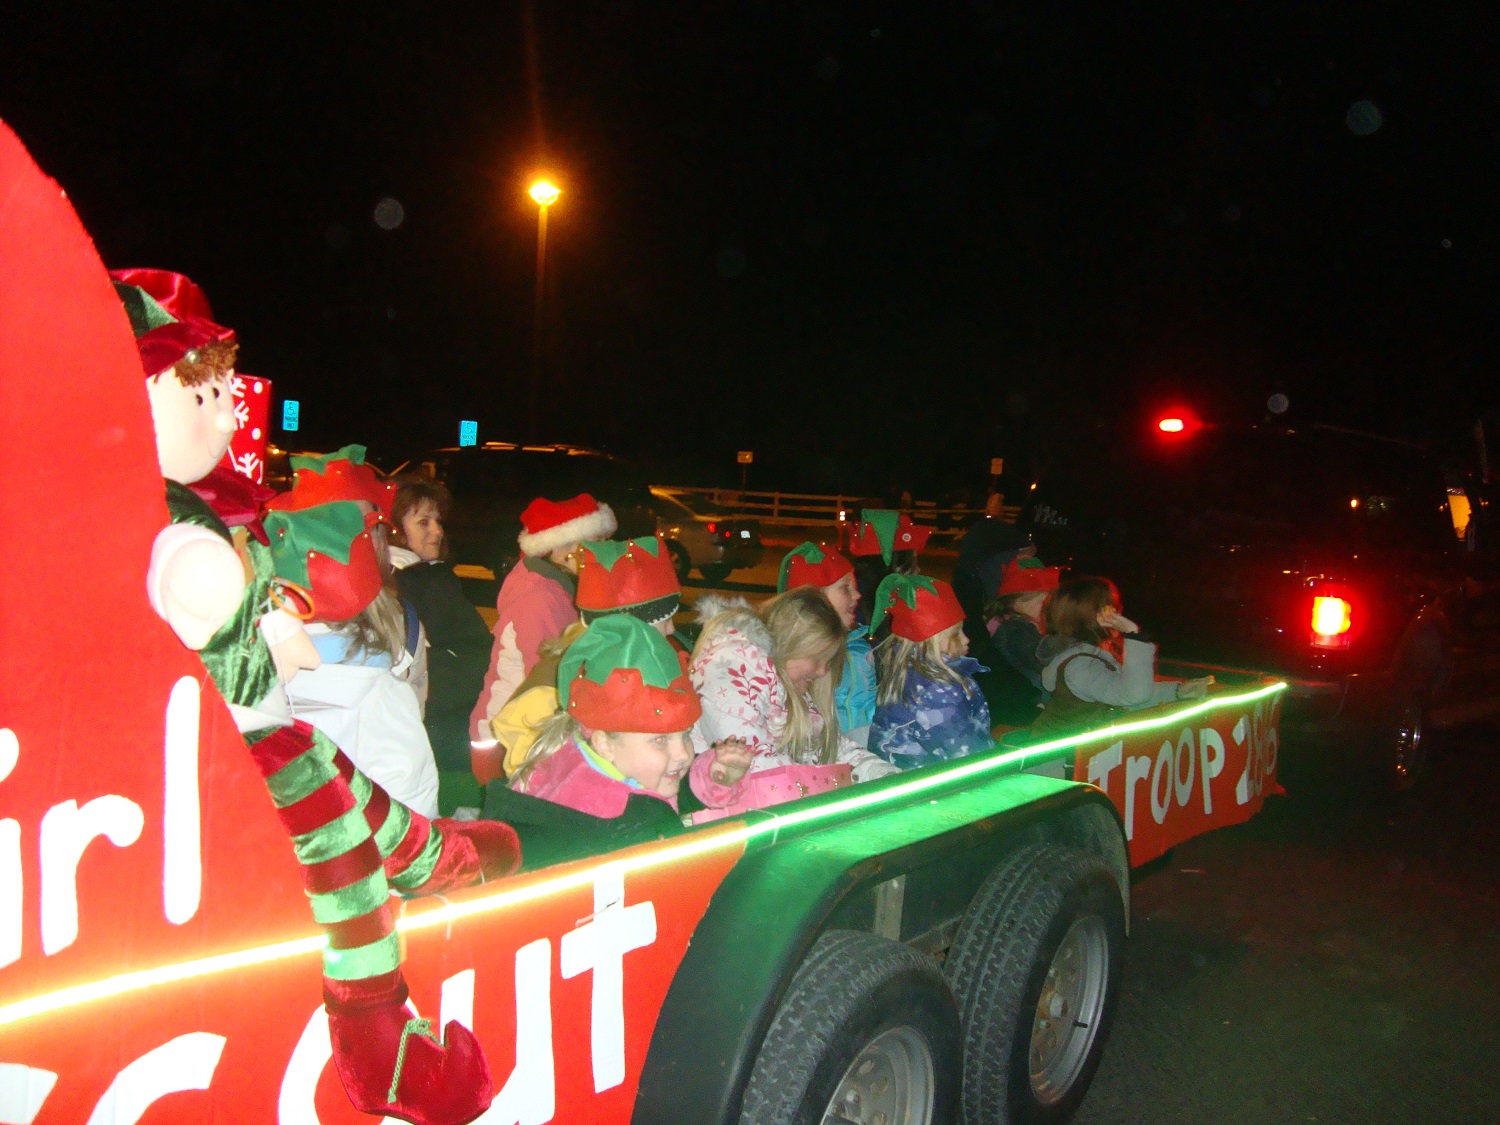 Students from Girl Scout Troop 2866 participating in the Parade of Lights Holiday Fest parade float - courtesy of Rivergold